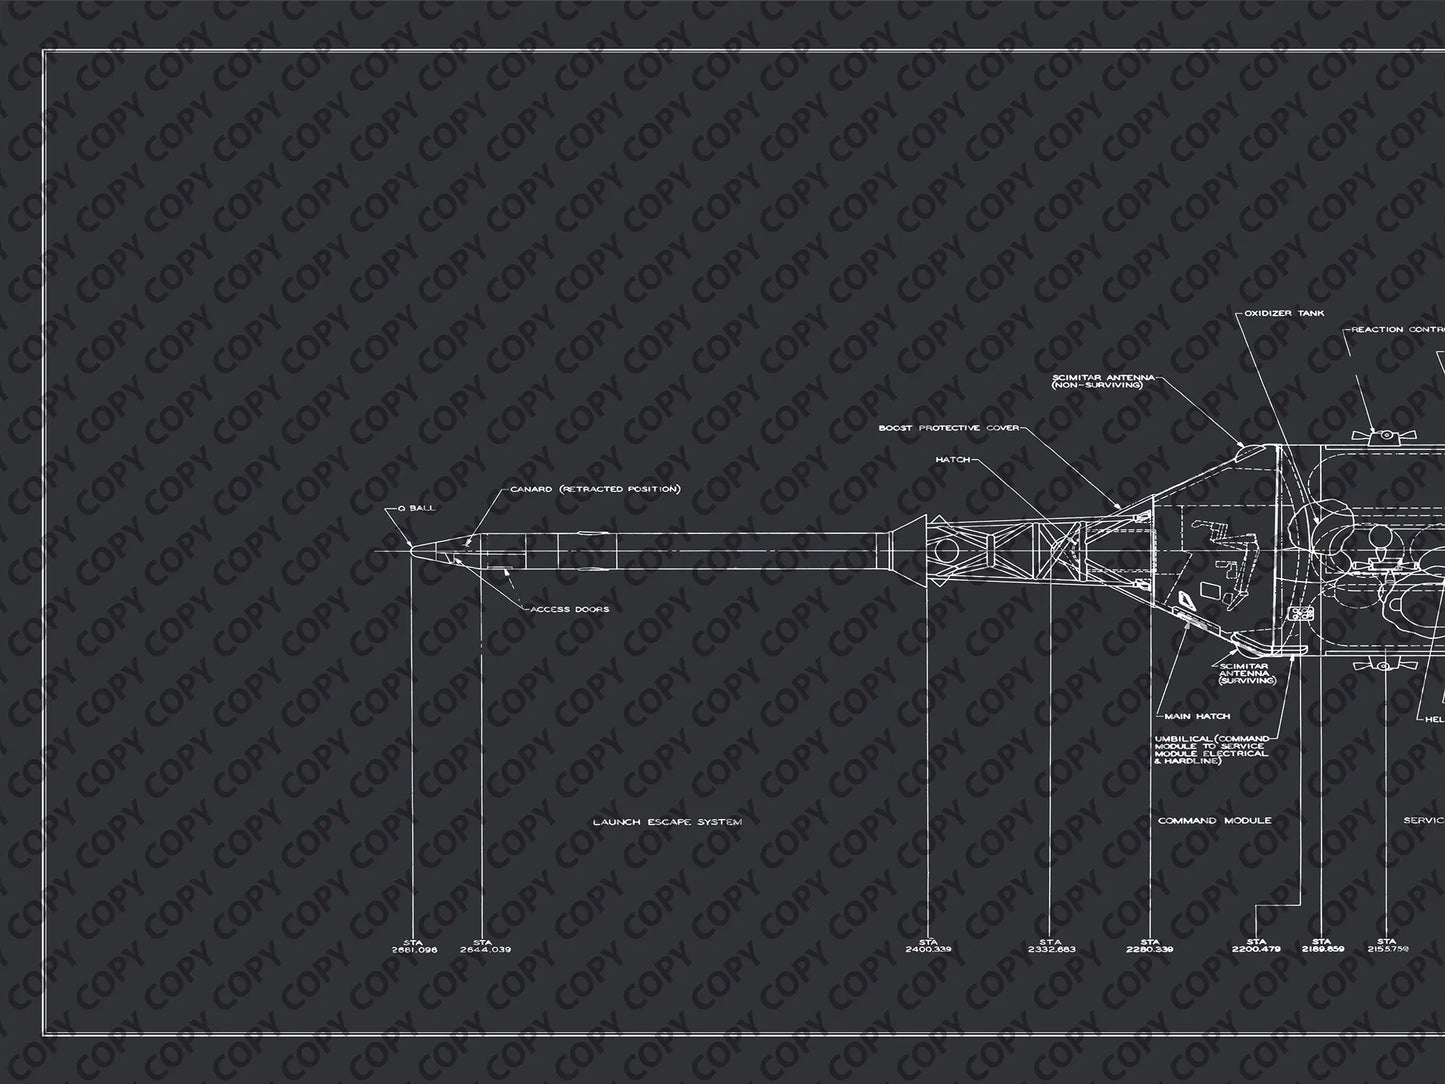 Apollo Saturn Blueprint | NASA posters | Technical blueprint Diagram | A section of the Saturn IB rocket blueprint, featuring intricate technical drawings and labeled parts like the reaction control system, main hatch, and umbilical command module on a dark background.